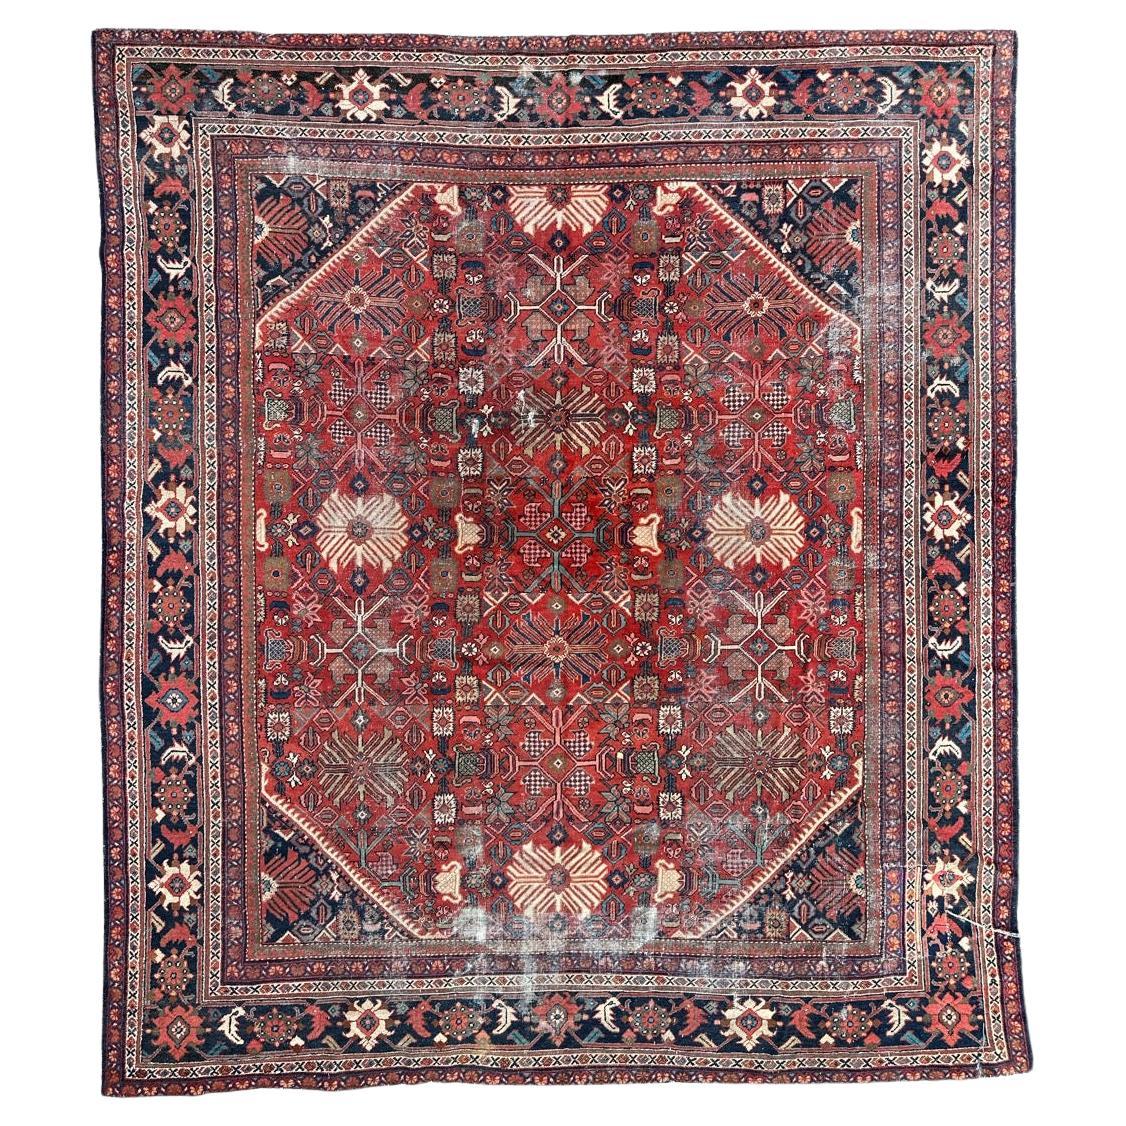 Bobyrug’s Pretty large antique mahal rug  For Sale